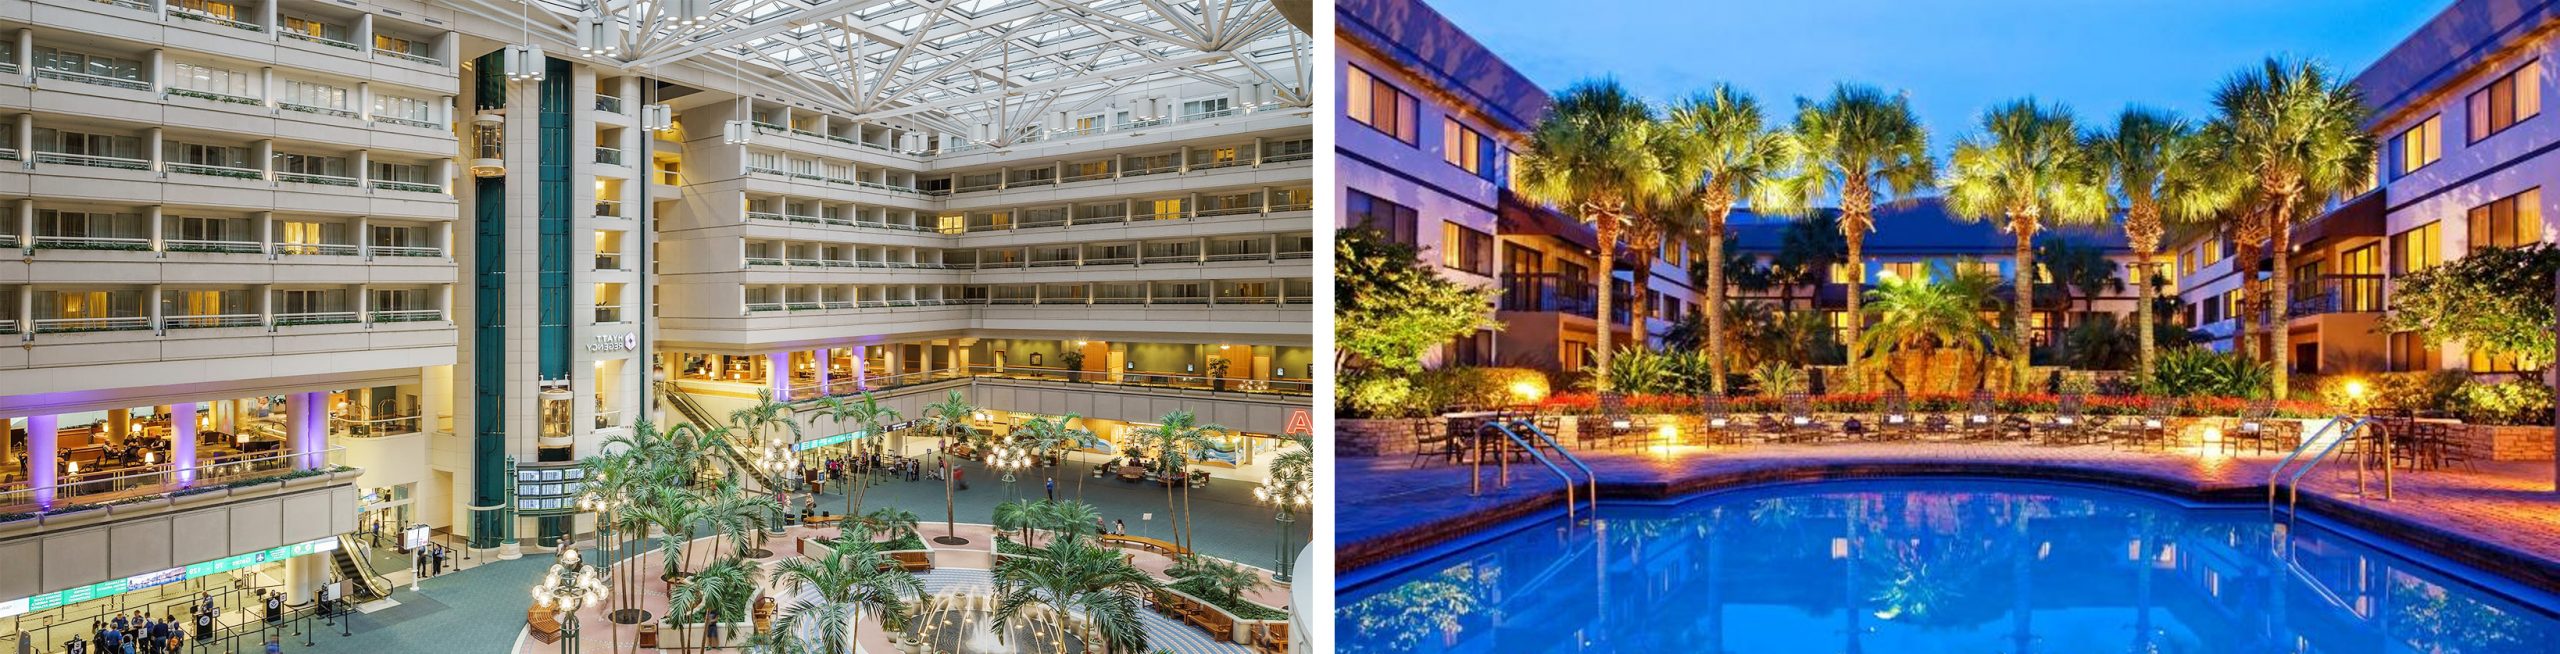 hotels near mco airport